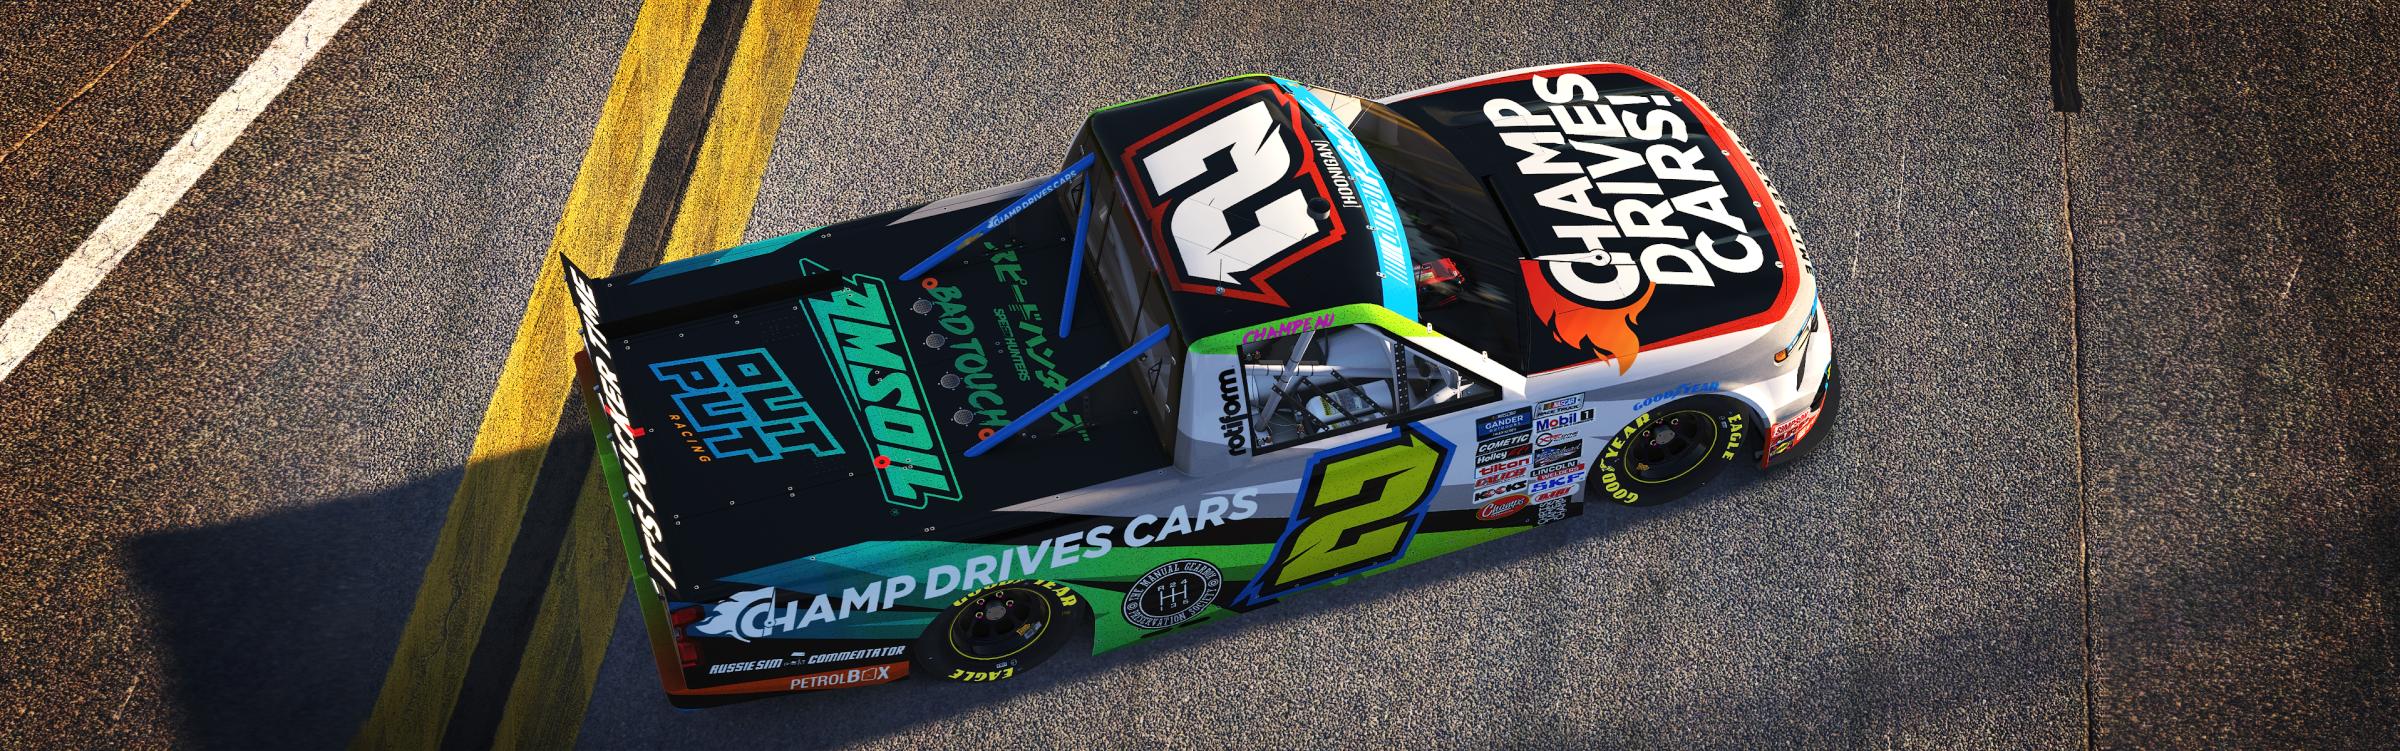 Preview of Champ Drives Cars Chevy Silverado by Chris Champeau